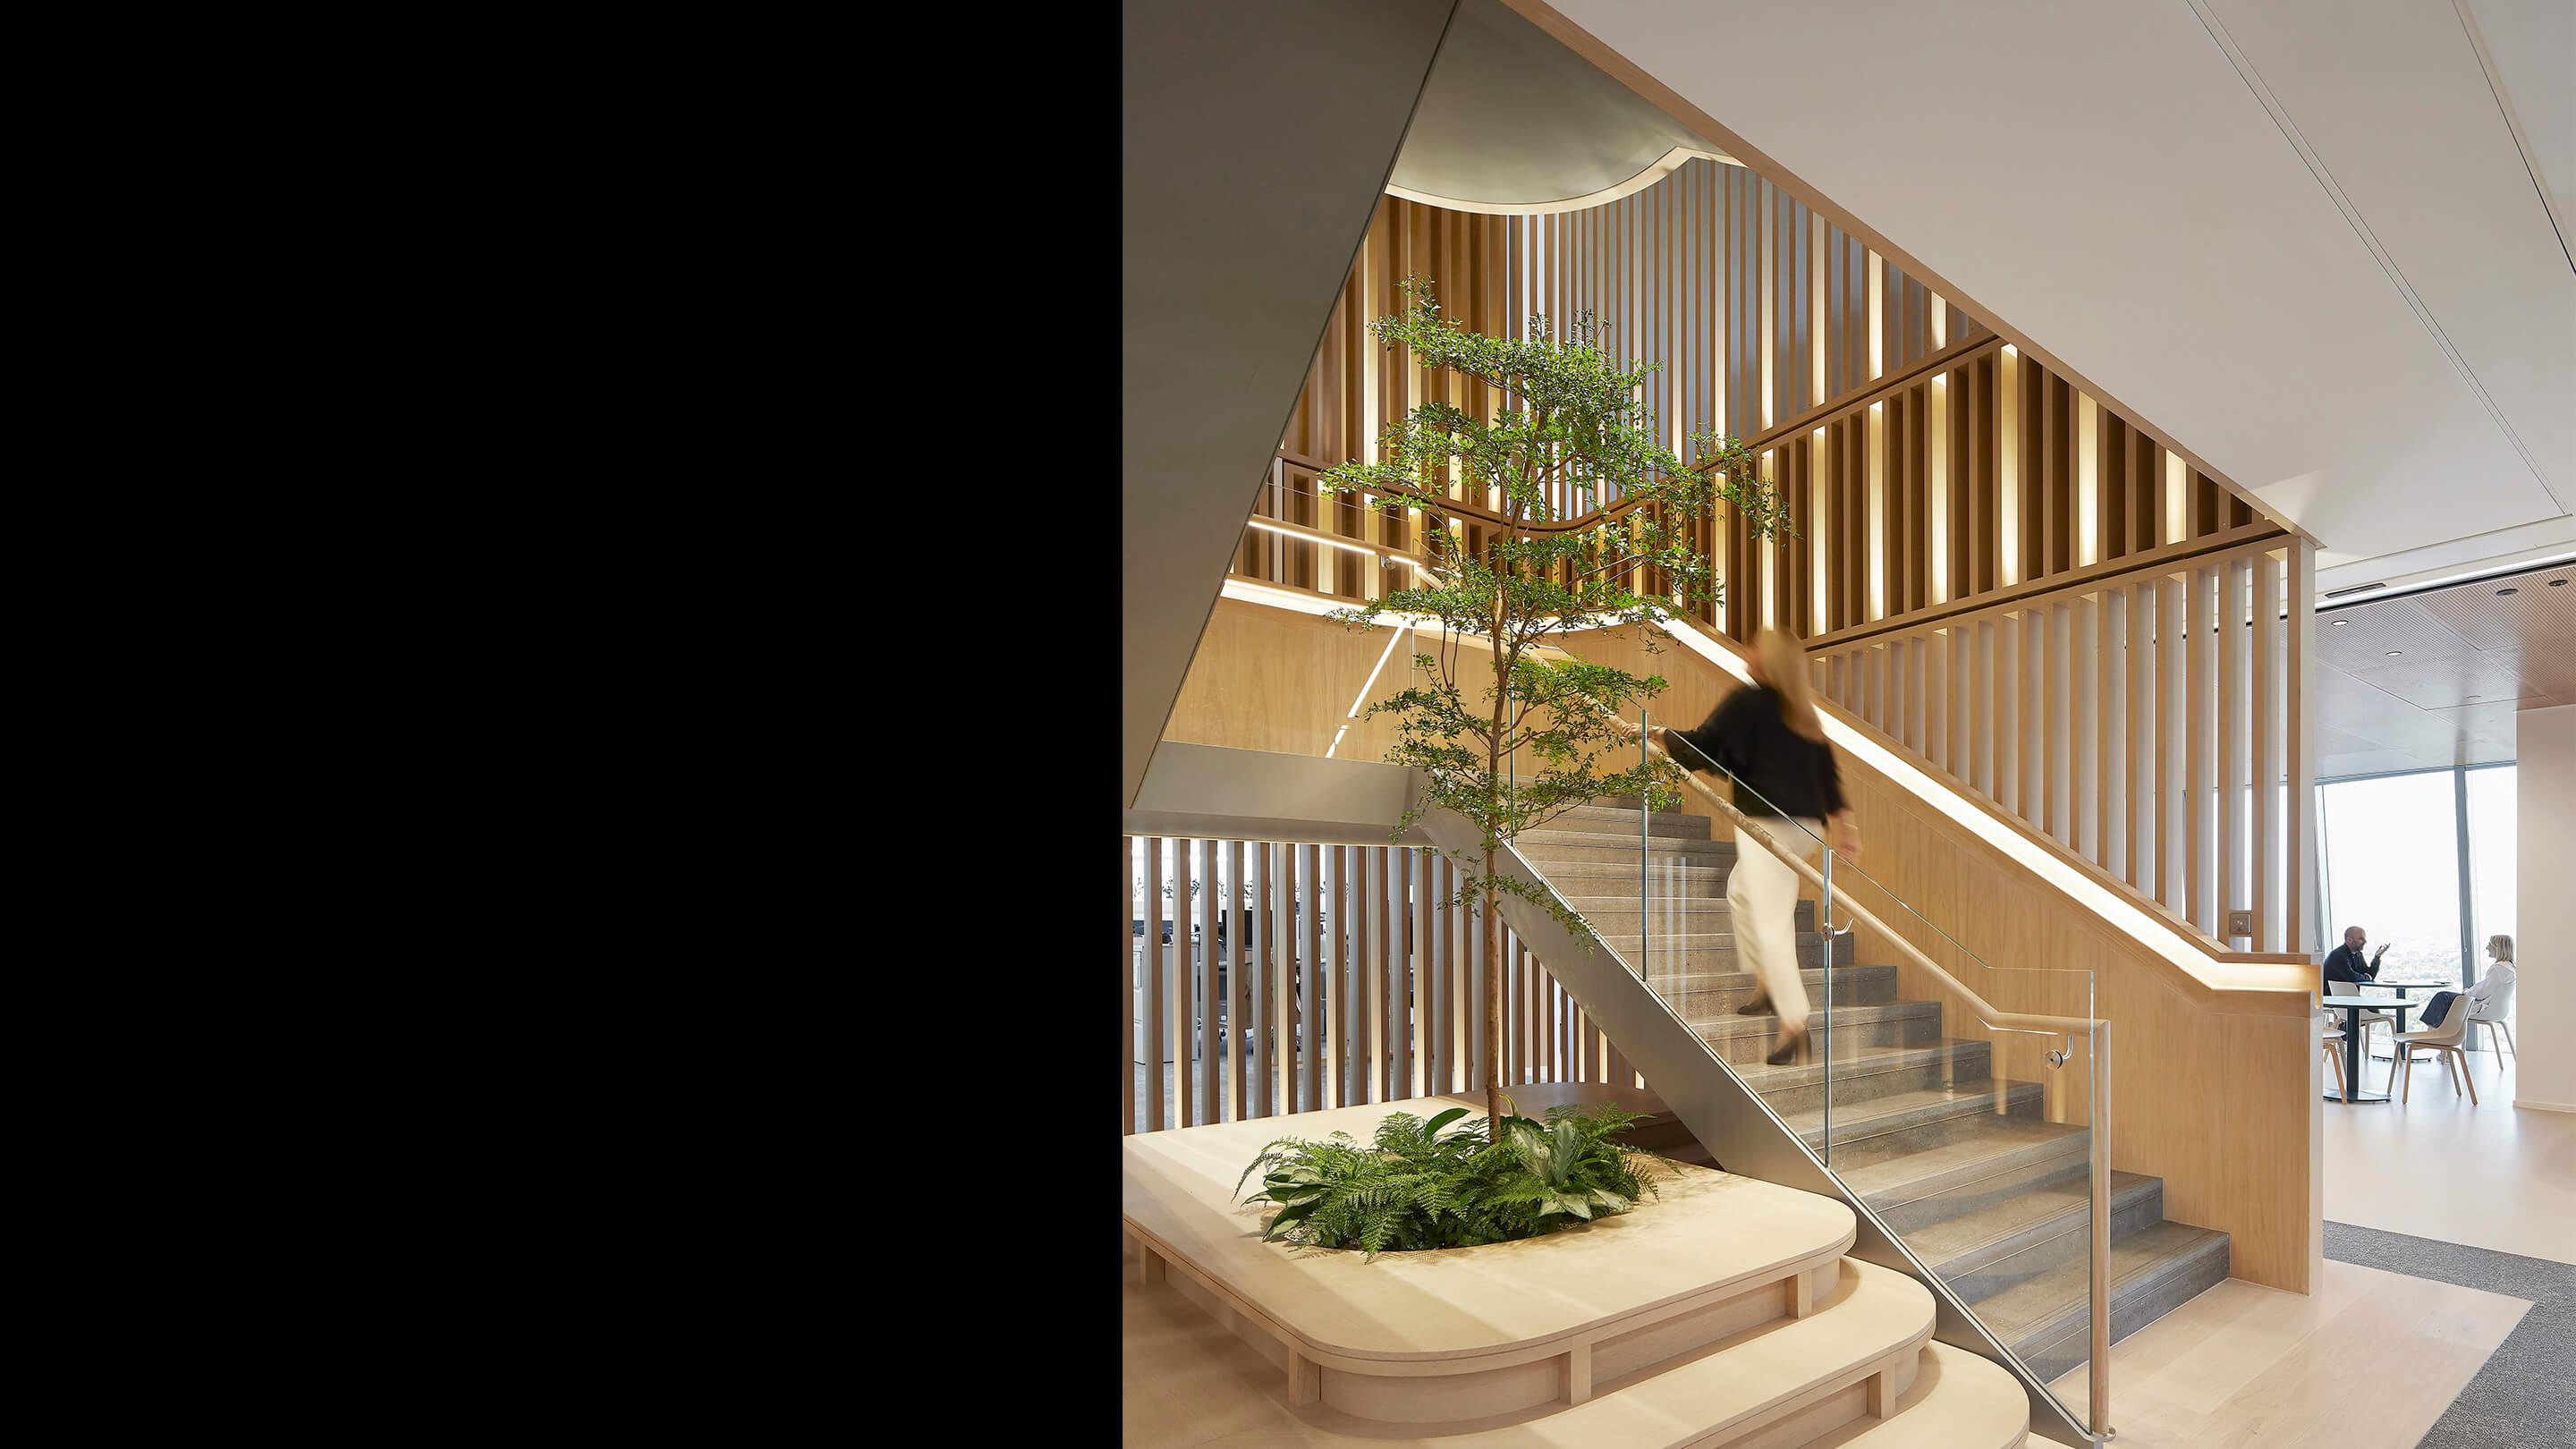 This staircase connects three client-facing floors, including the auditorium and board room. Paneled with oak millwork and spiraling up around a tree, it signals the project’s connection to nature.